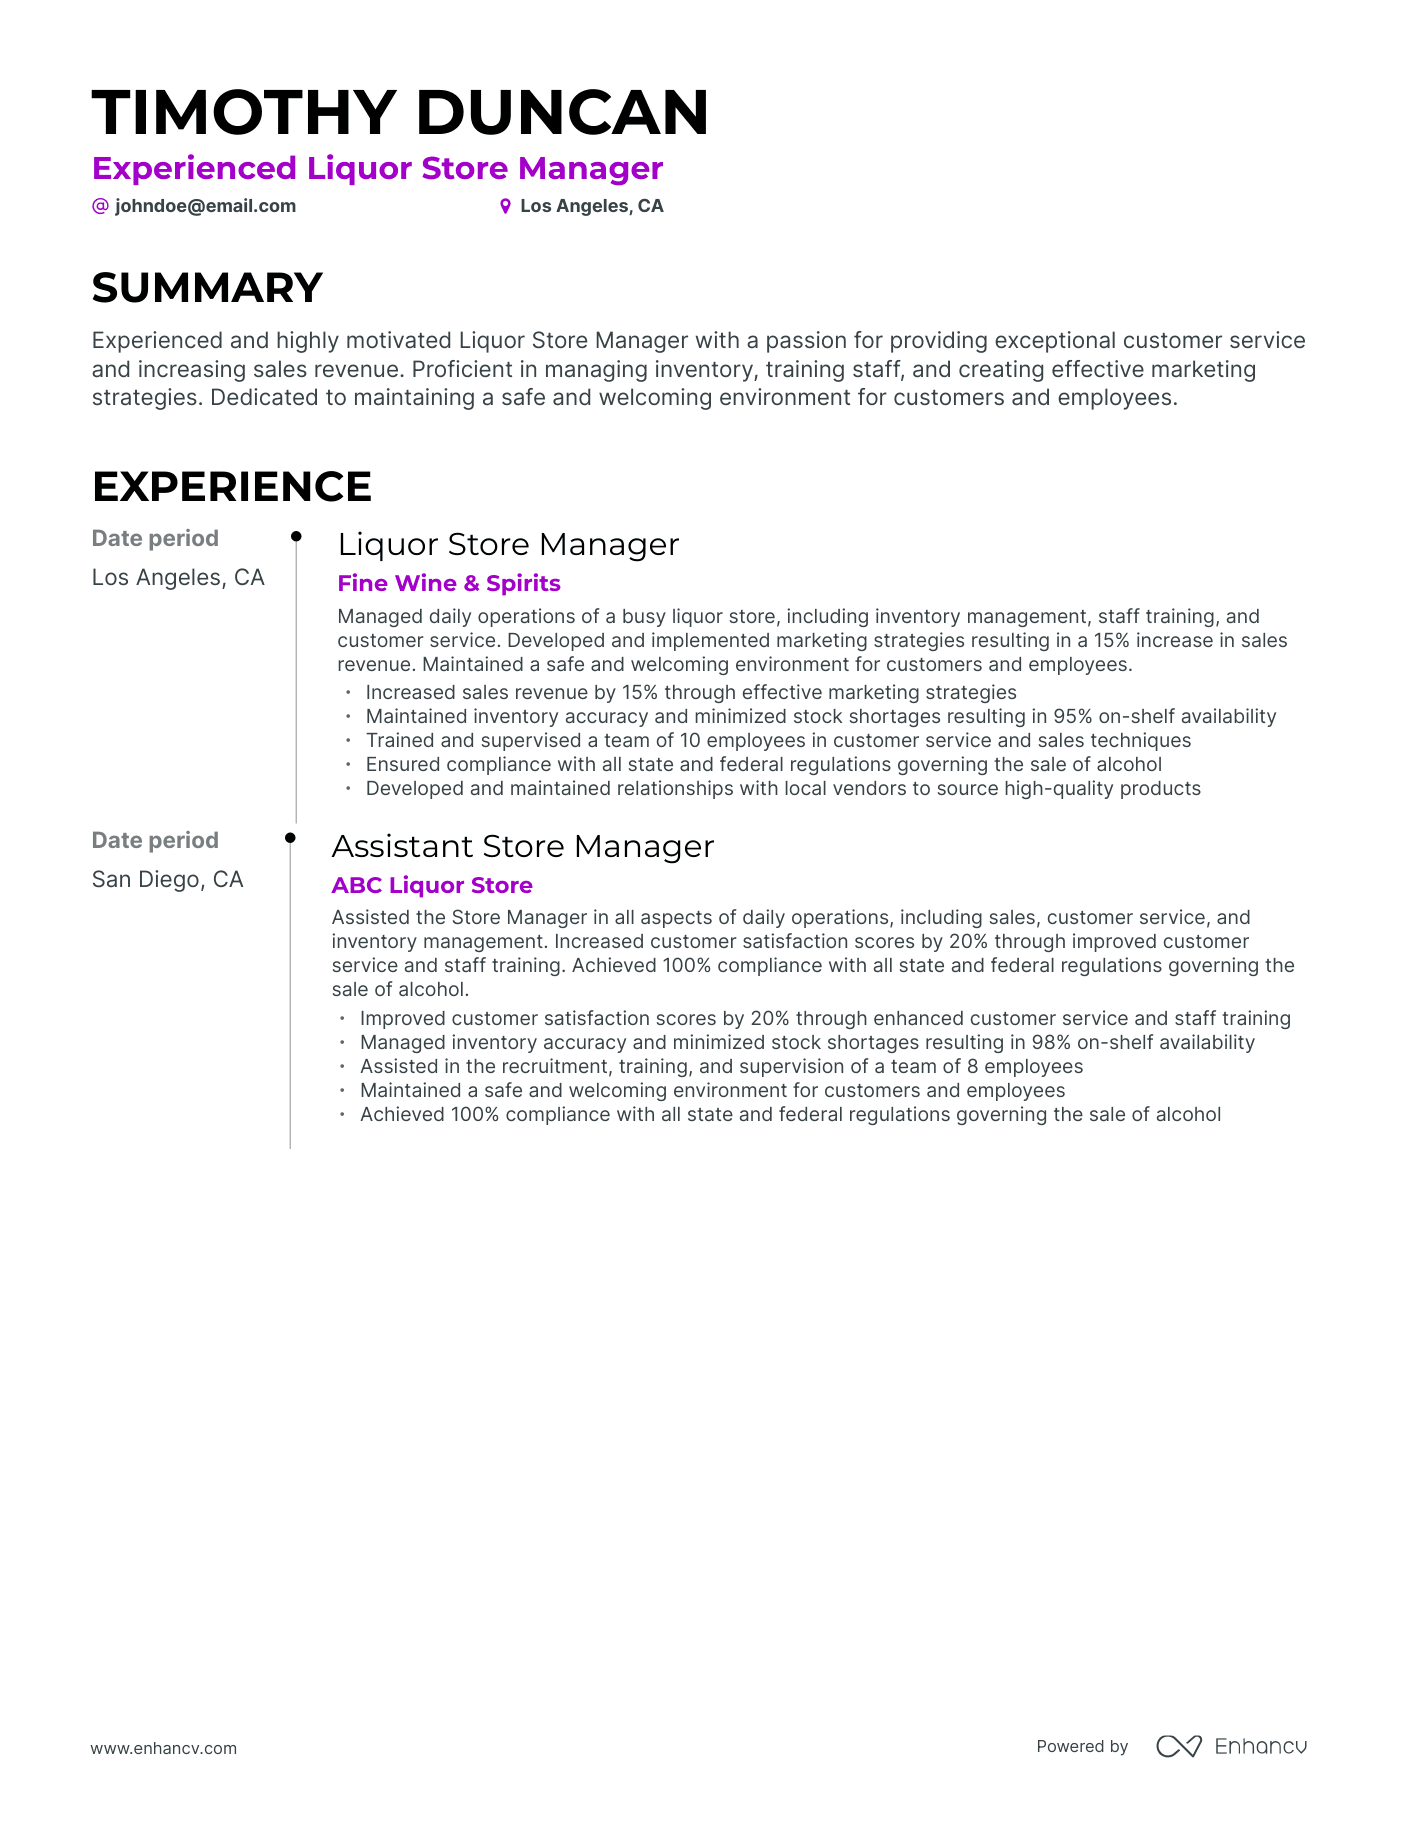 Timeline Liquor Store Manager Resume Template